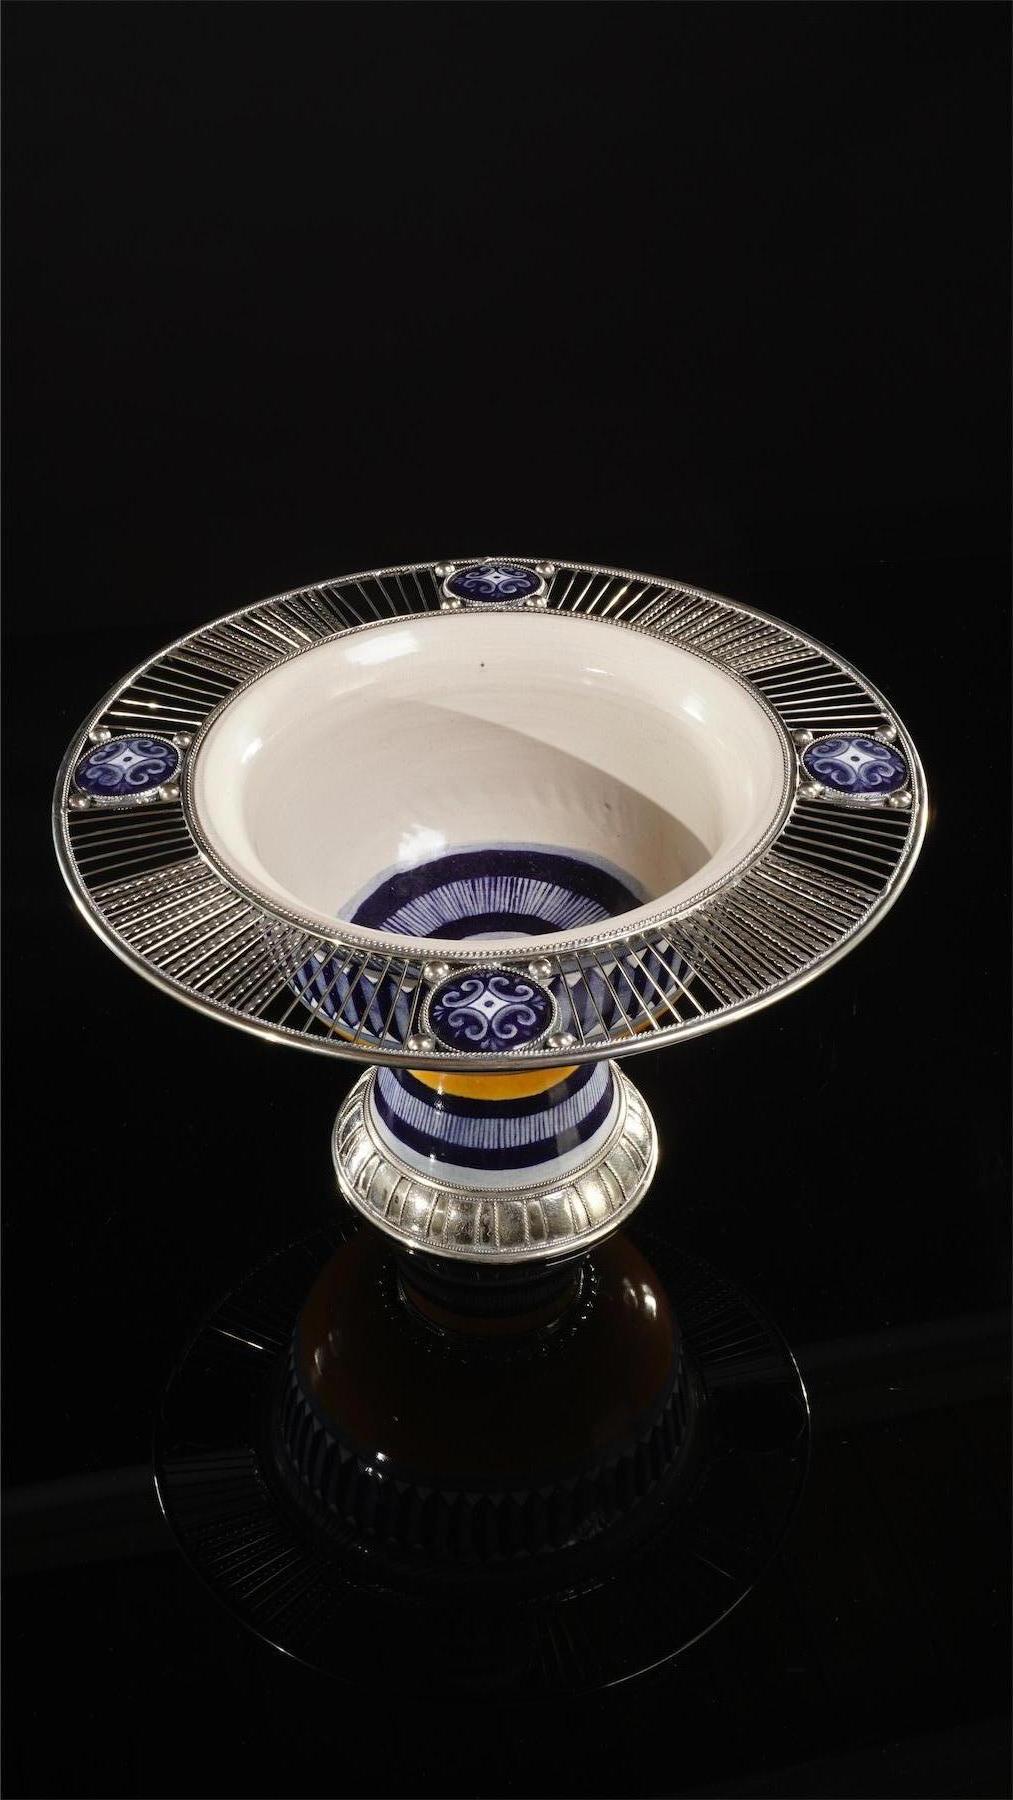 Always unique pieces is what you are going to hear about Jesus Guerrero Santo's work, all the pieces are handmaded and created one by one it takes months to produce each peace.
This ceramica and white metal (alpaca) bowl centrepiece, was created in